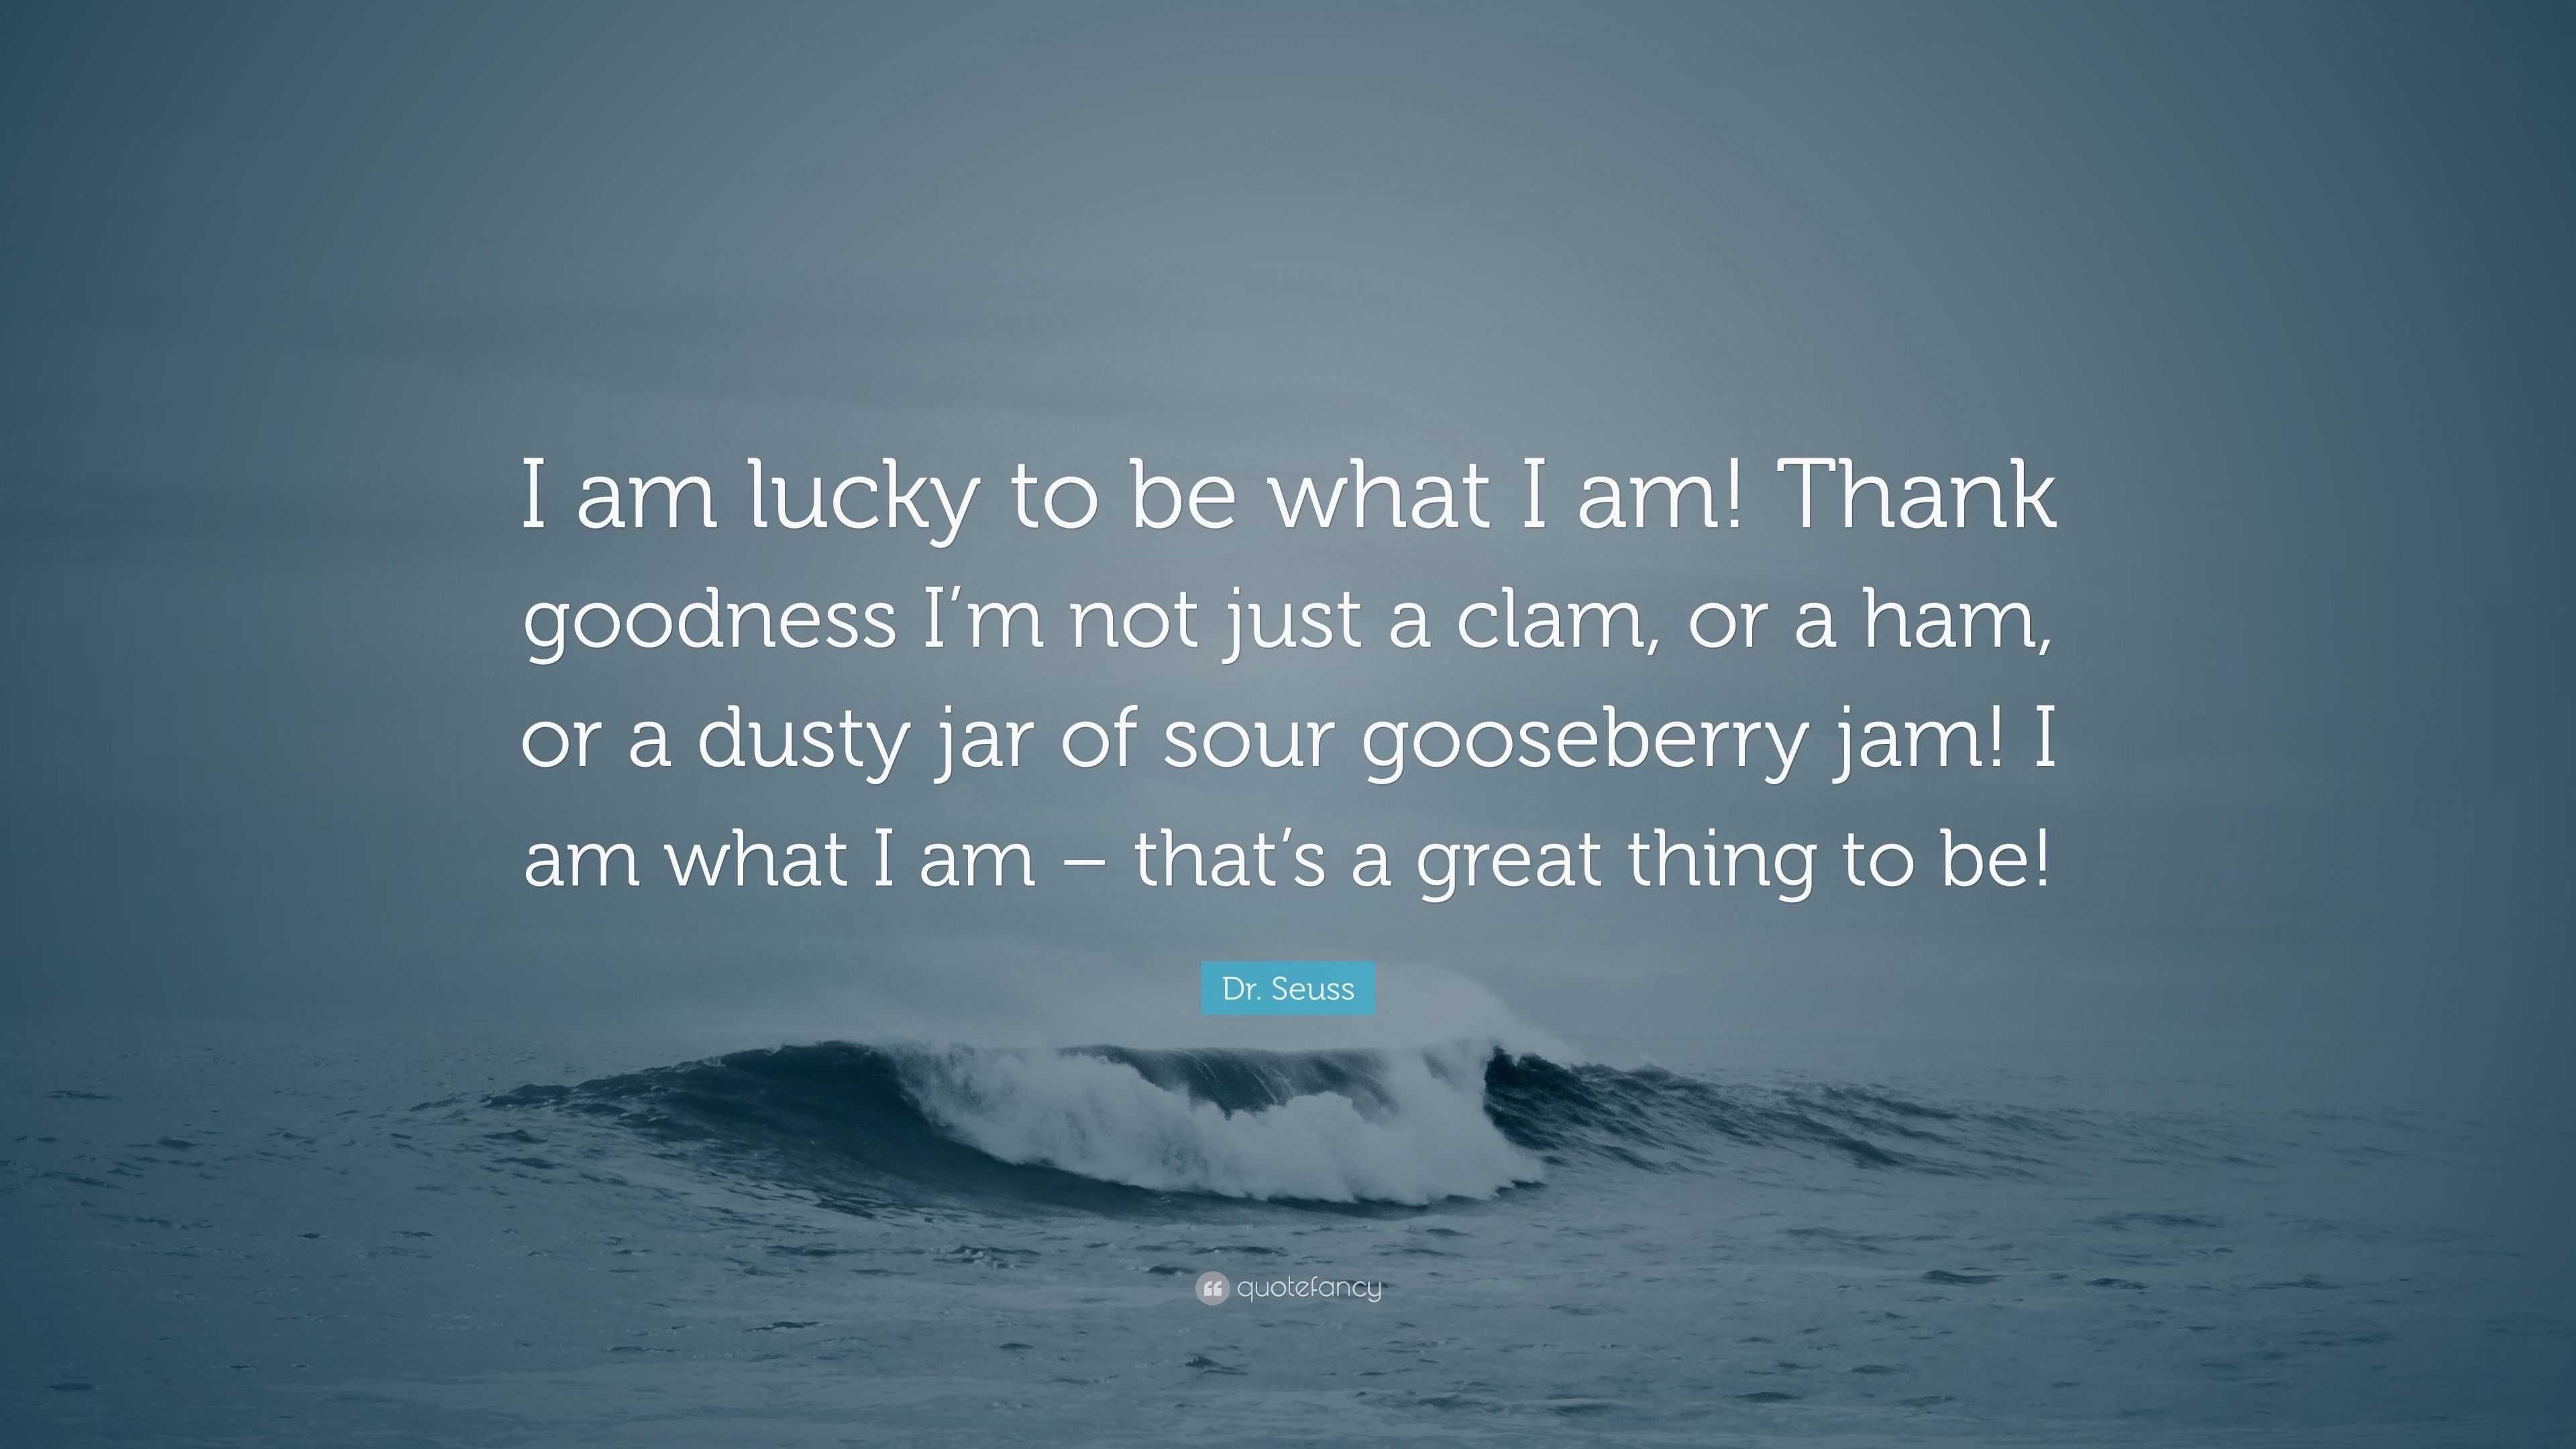 Dr Seuss Quote I Am Lucky To Be What I Am Thank Goodness I M Not Just A Clam Or A Ham Or A Dusty Jar Of Sour Gooseberry Jam I Am Wh